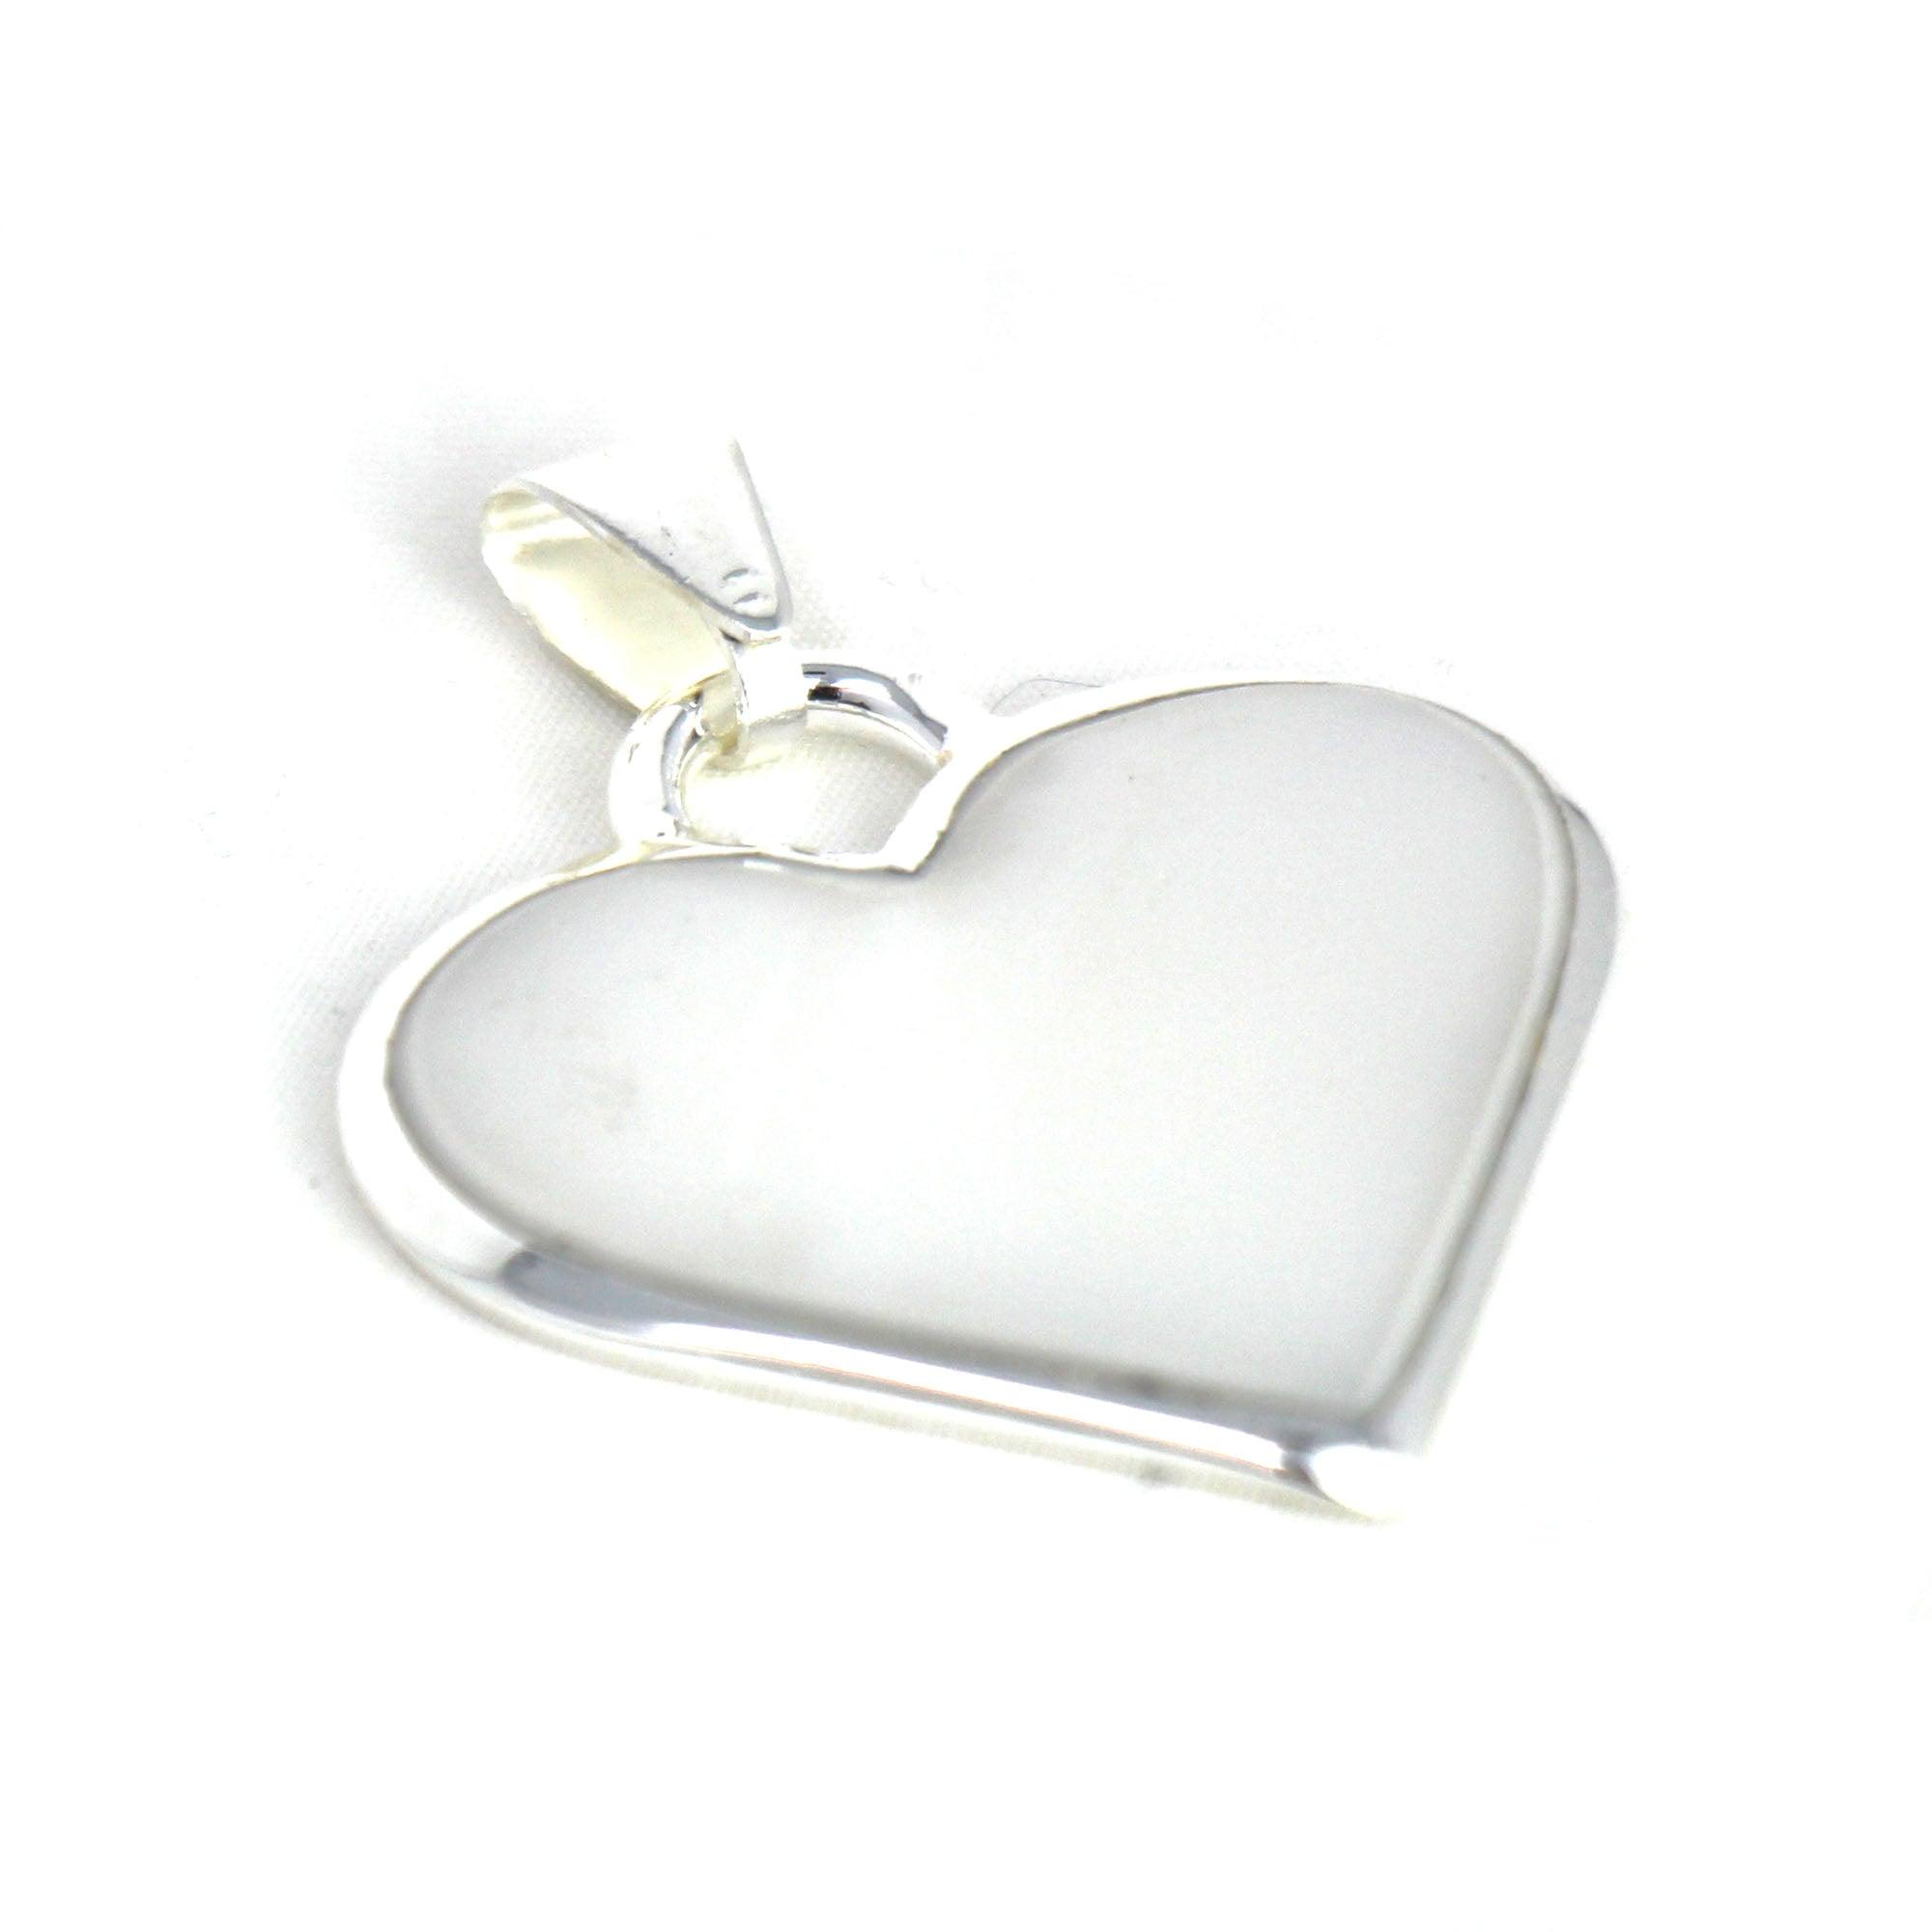 Corazon Blanco White Heart Pendant with Chain - Flyclothing LLC